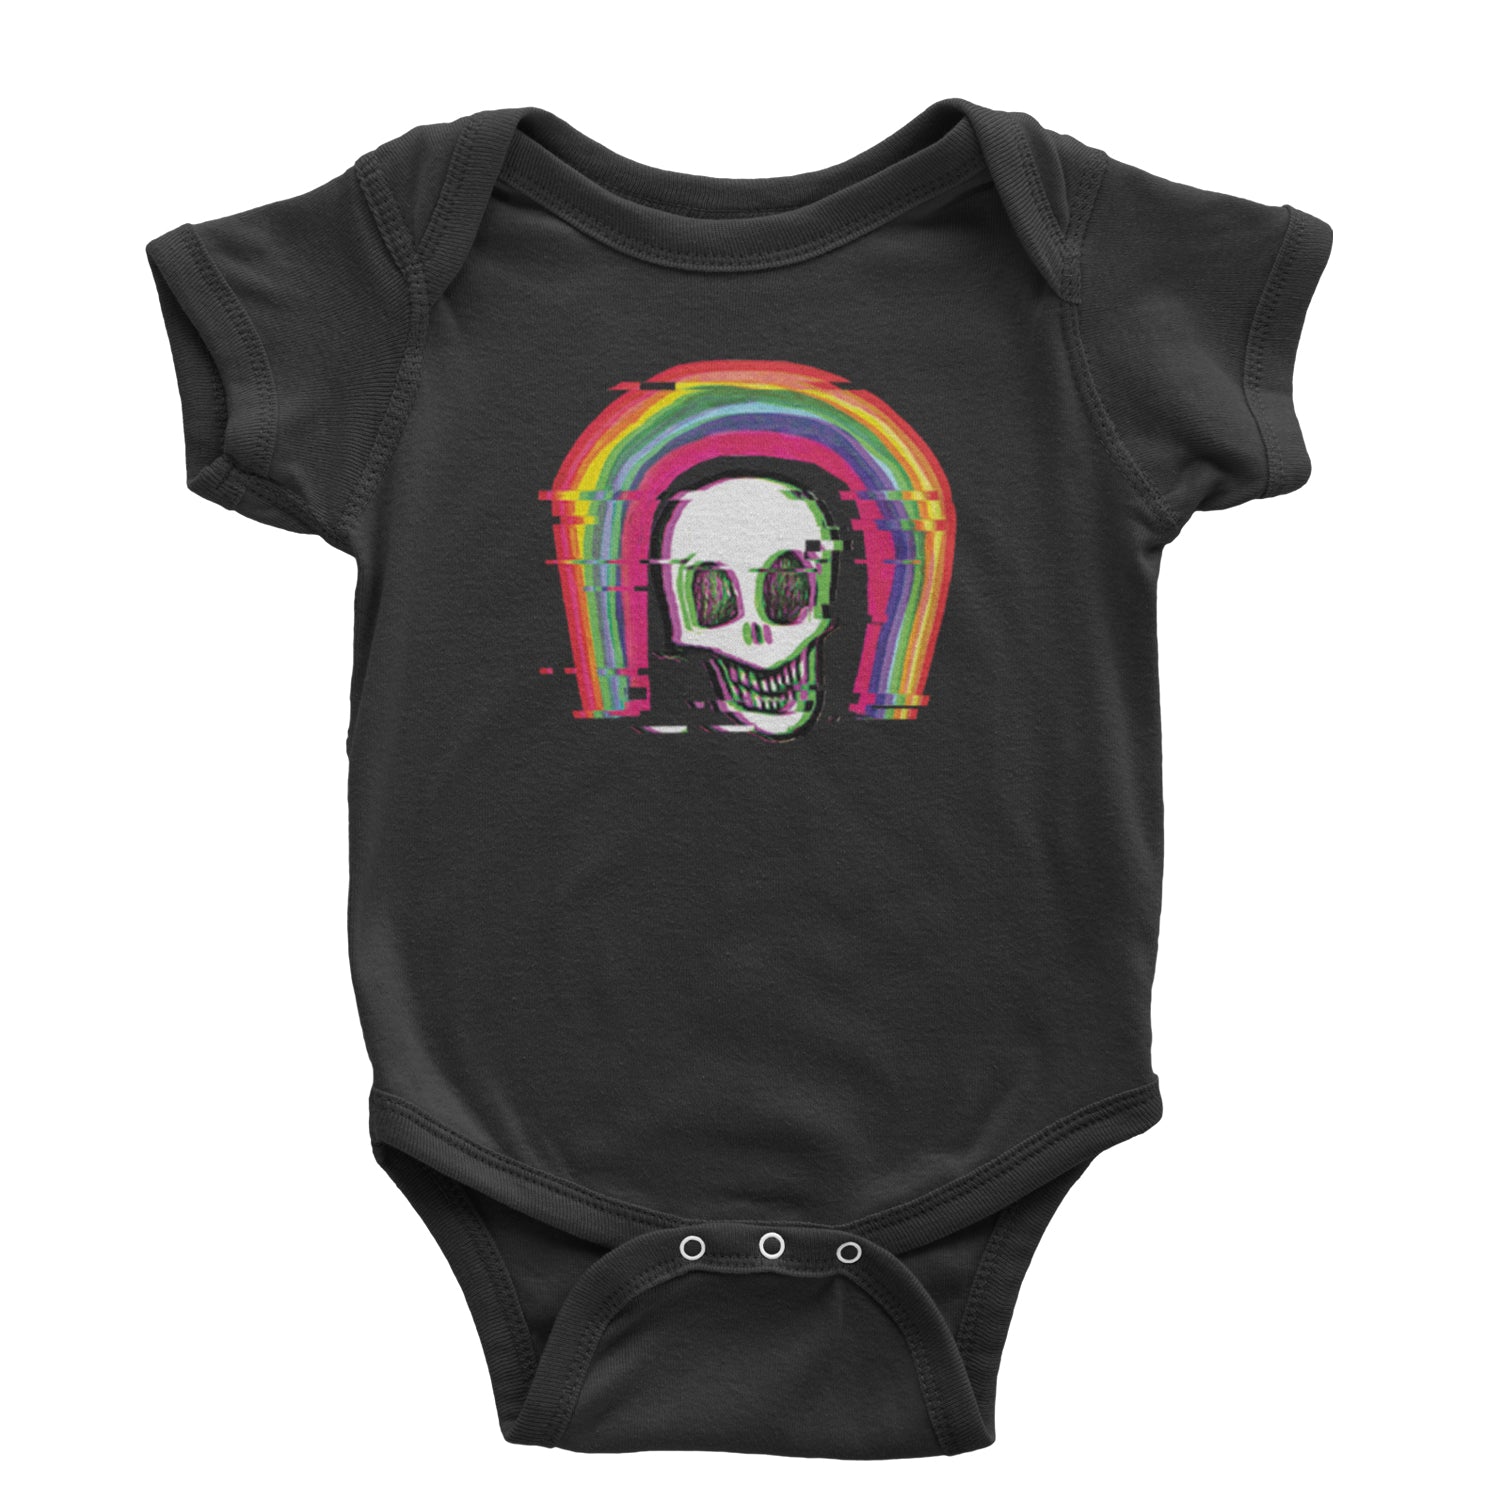 Rainbow Distorted Skull Infant One-Piece Romper Bodysuit and Toddler T-shirt